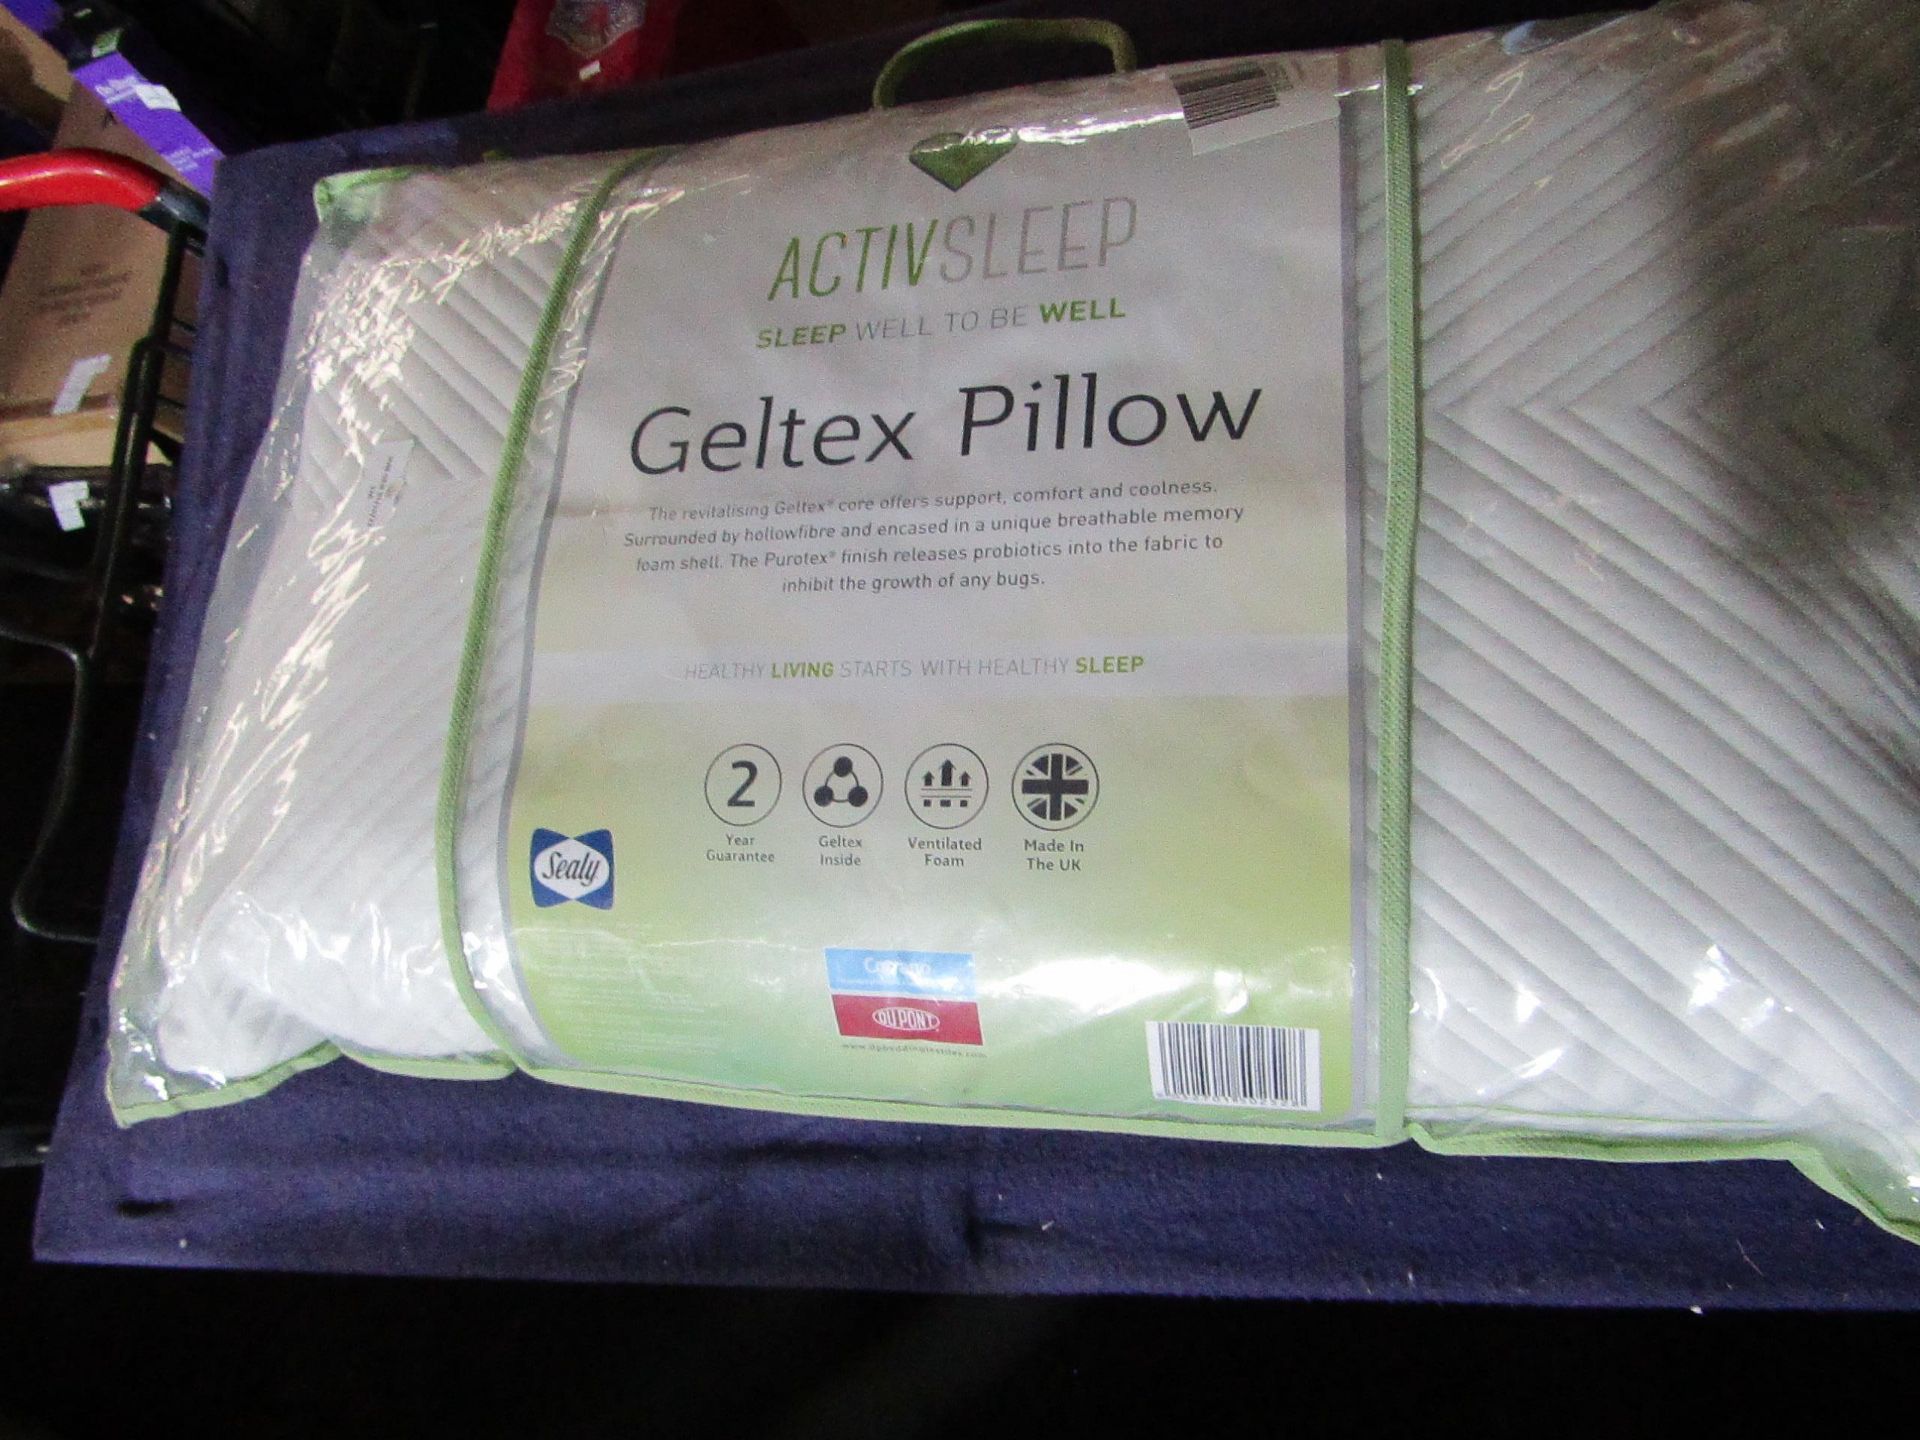 Sealy - ActivSleep Geltex Pillow - Looks In Good Condition & Packaged.